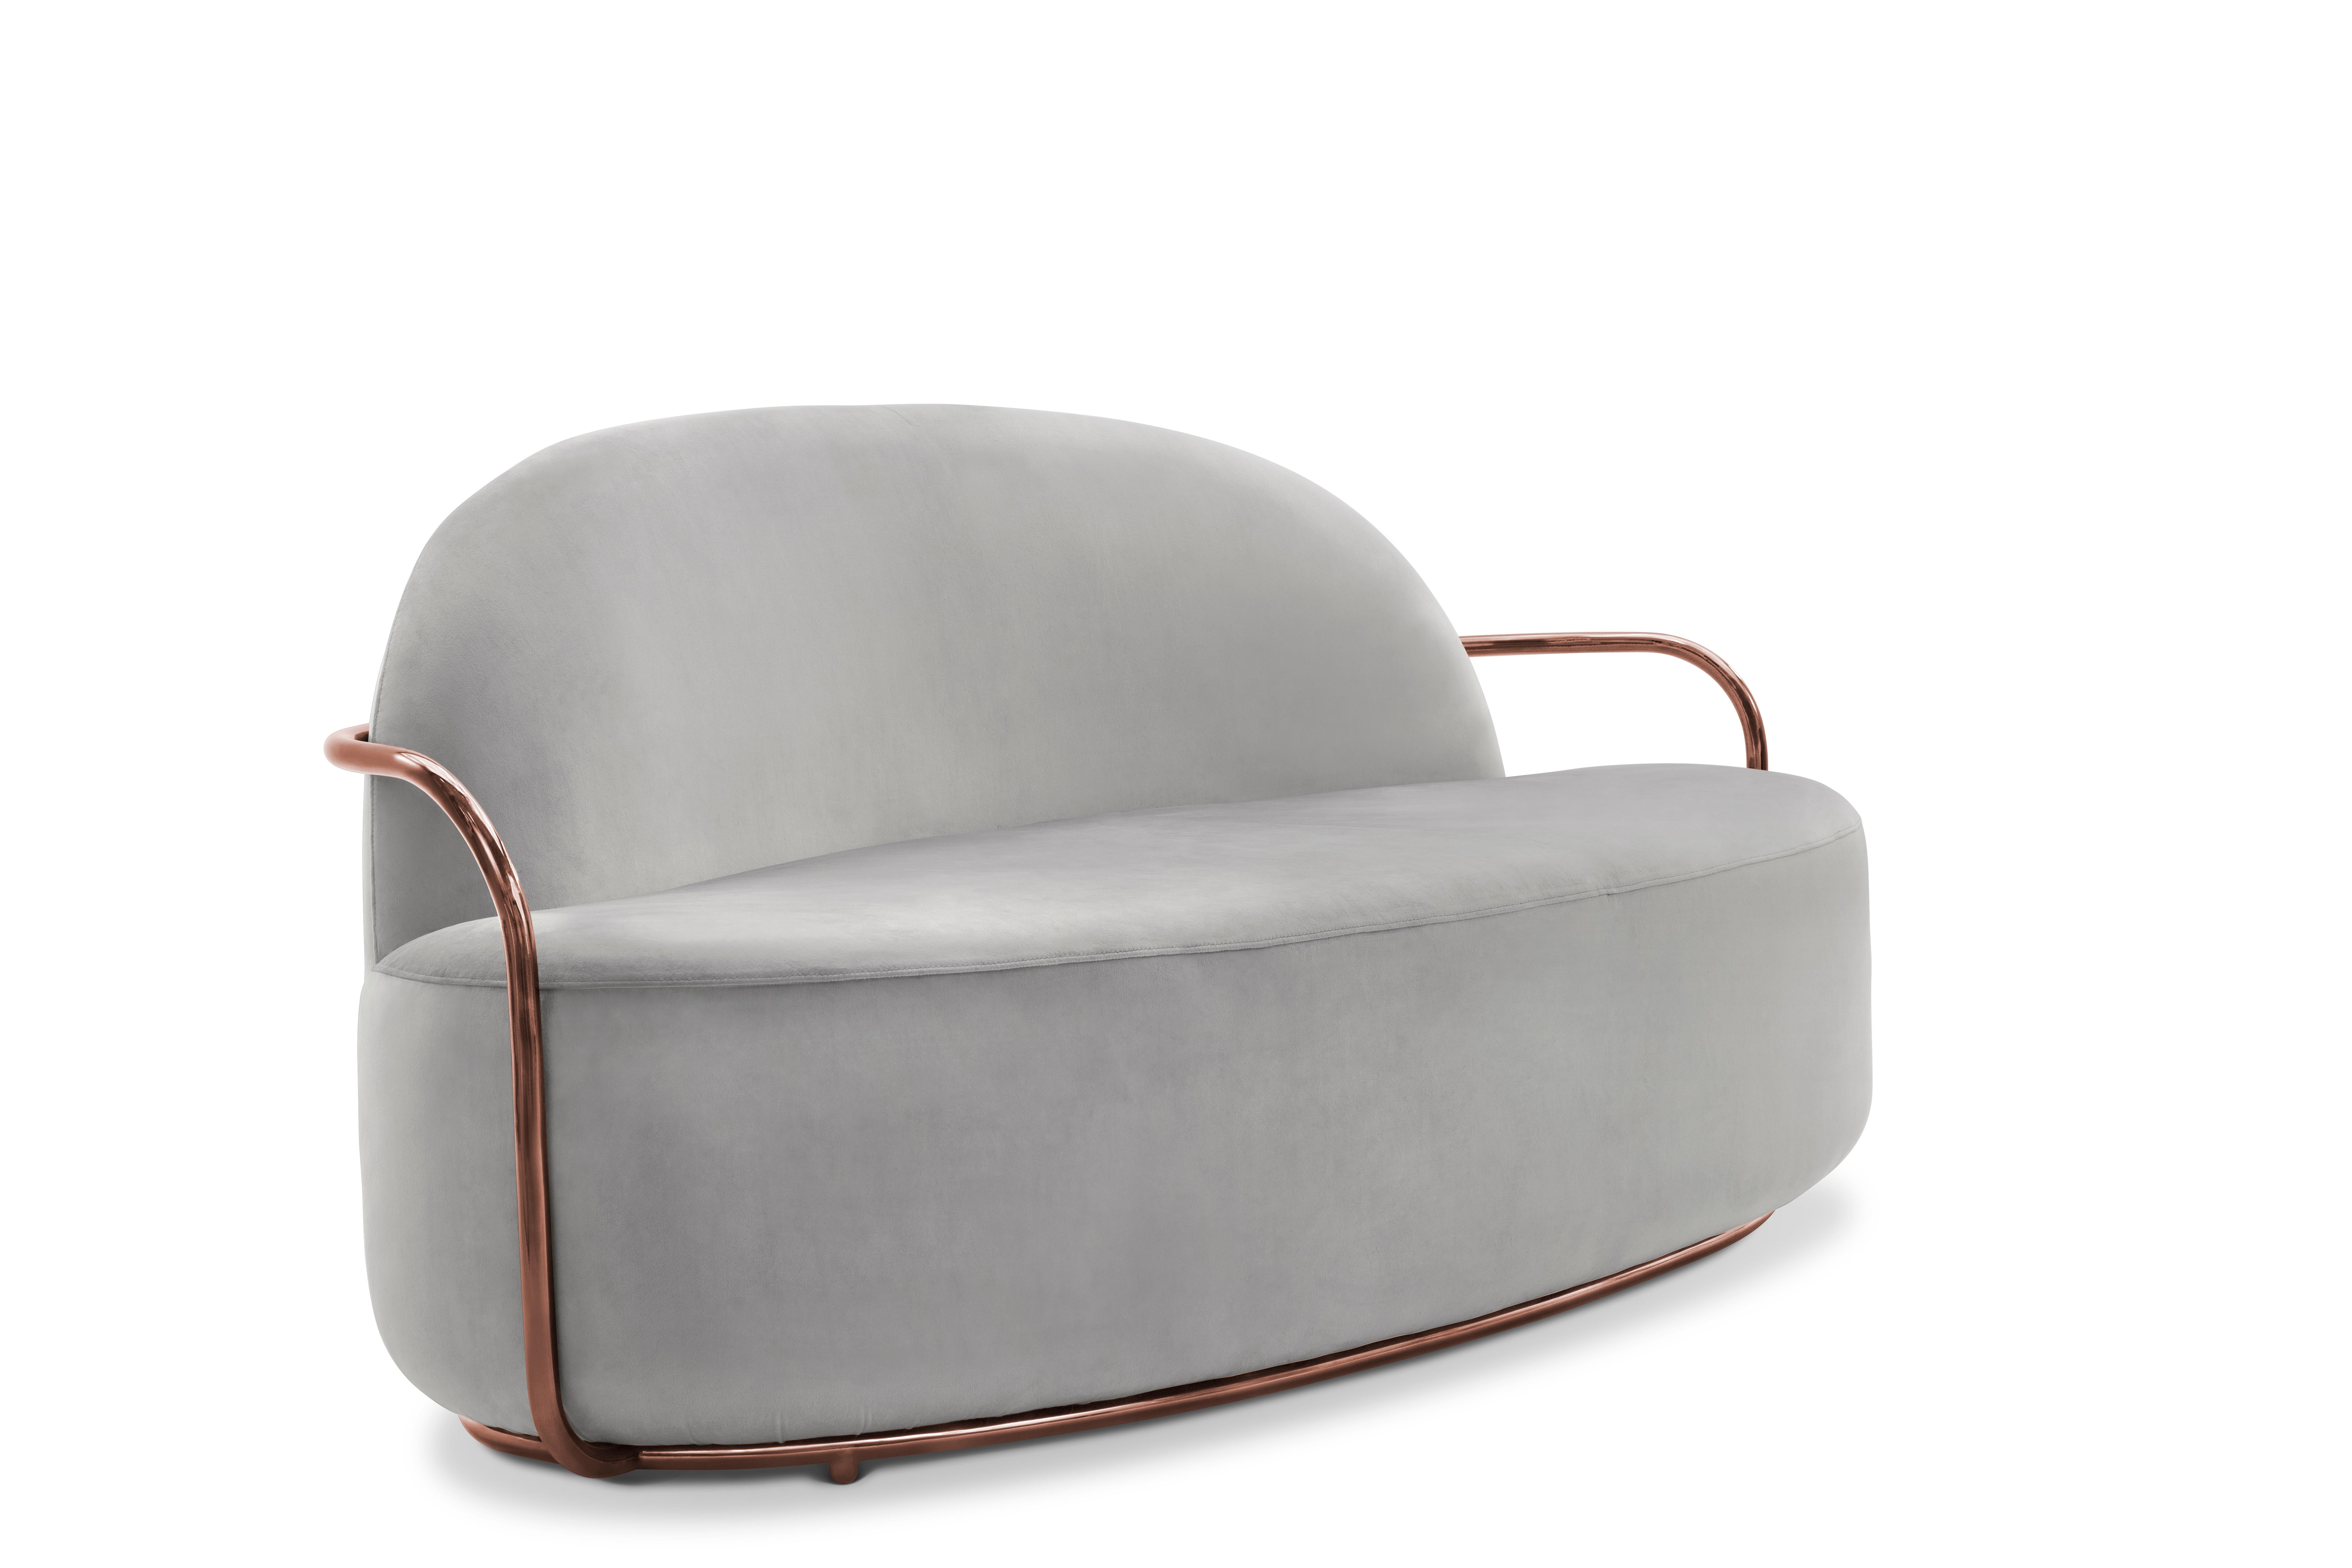 Orion 3 Seat Sofa with Plush Gray Velvet and Rose Gold Arms by Nika Zupanc has timeless appeal in light gray velvet and rich rose gold metal arms.

Nika Zupanc, a strikingly renowned Slovenian designer, never shies away from redefining the status